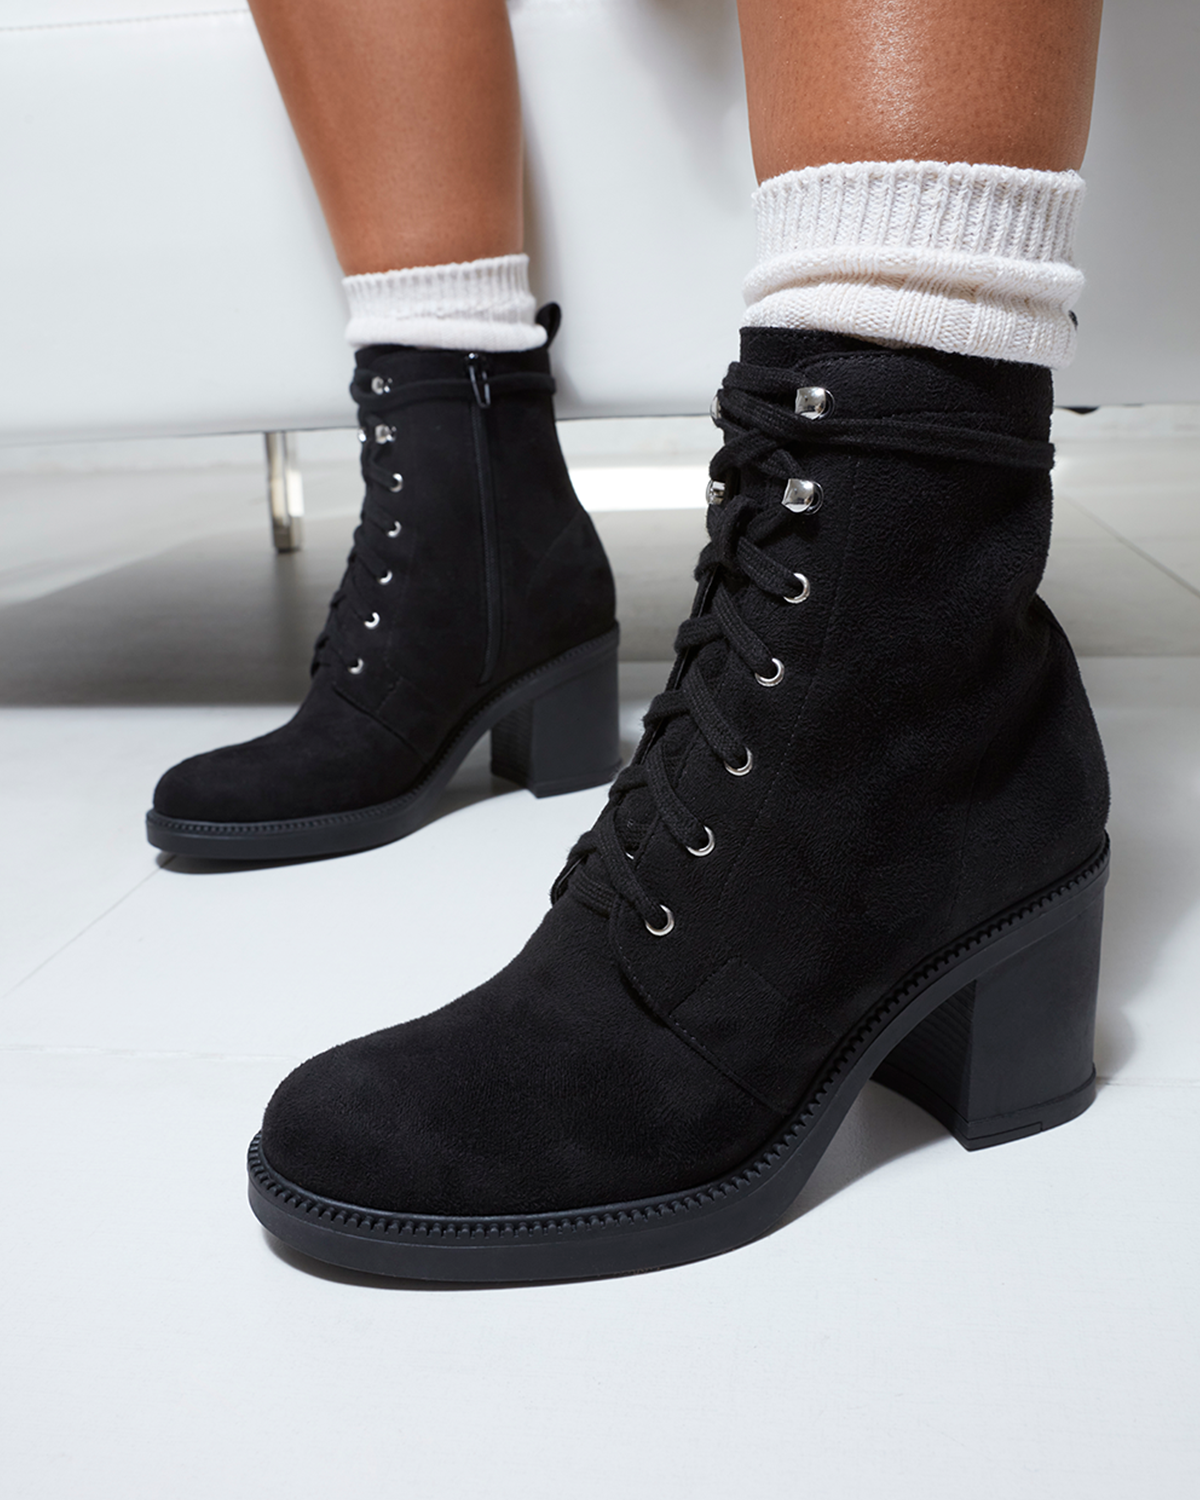 Therapy Shoes Sloane Black | Women's Boots | Lace Up | Ankle | Chunky